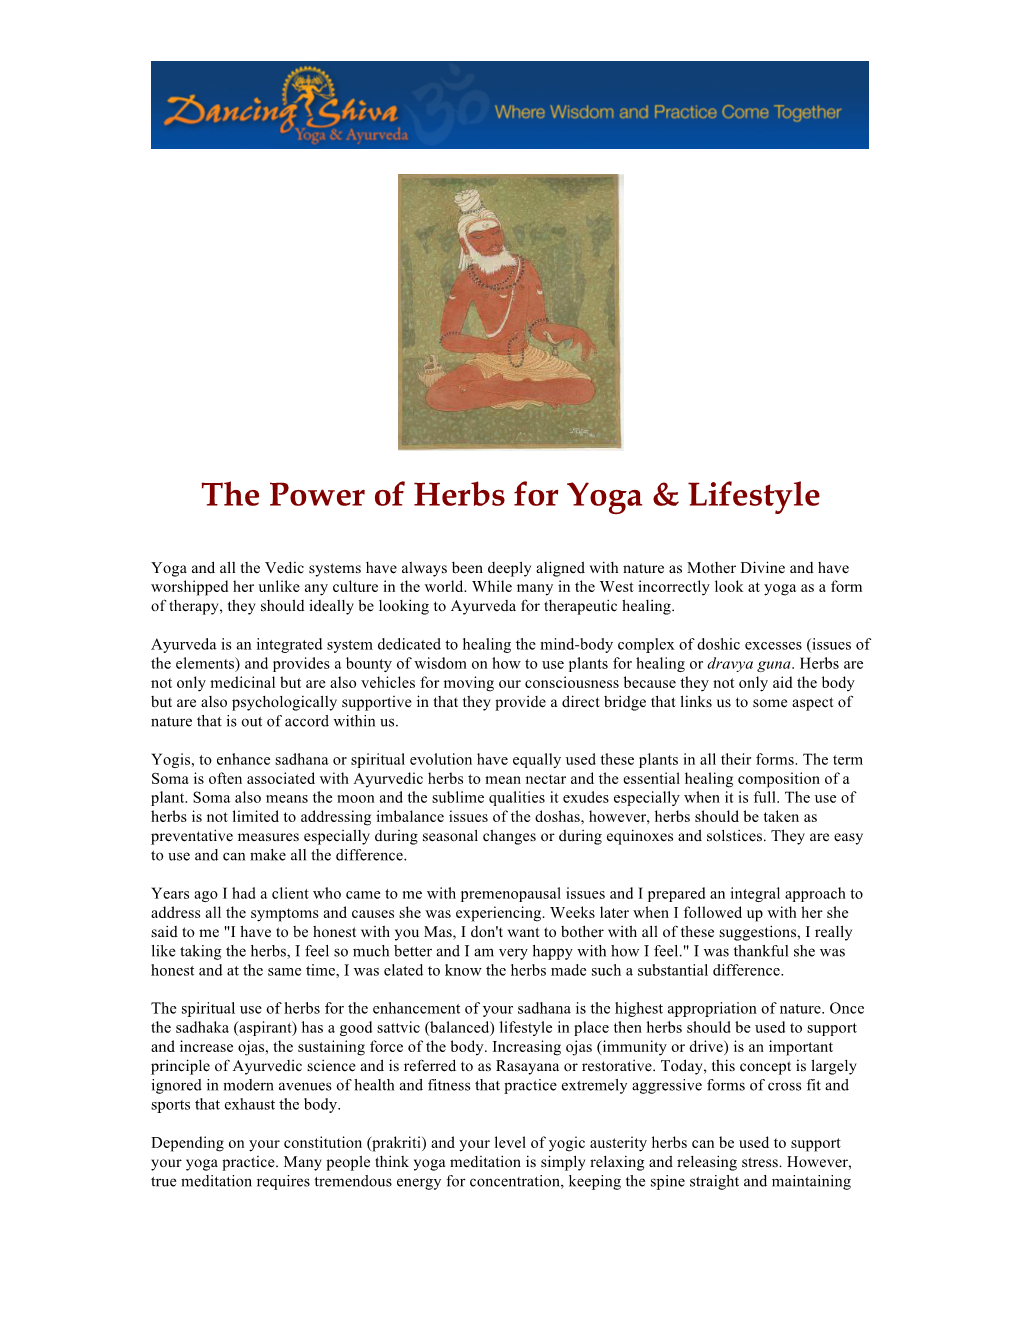 Power of Herbs for Yoga & Lifestyle